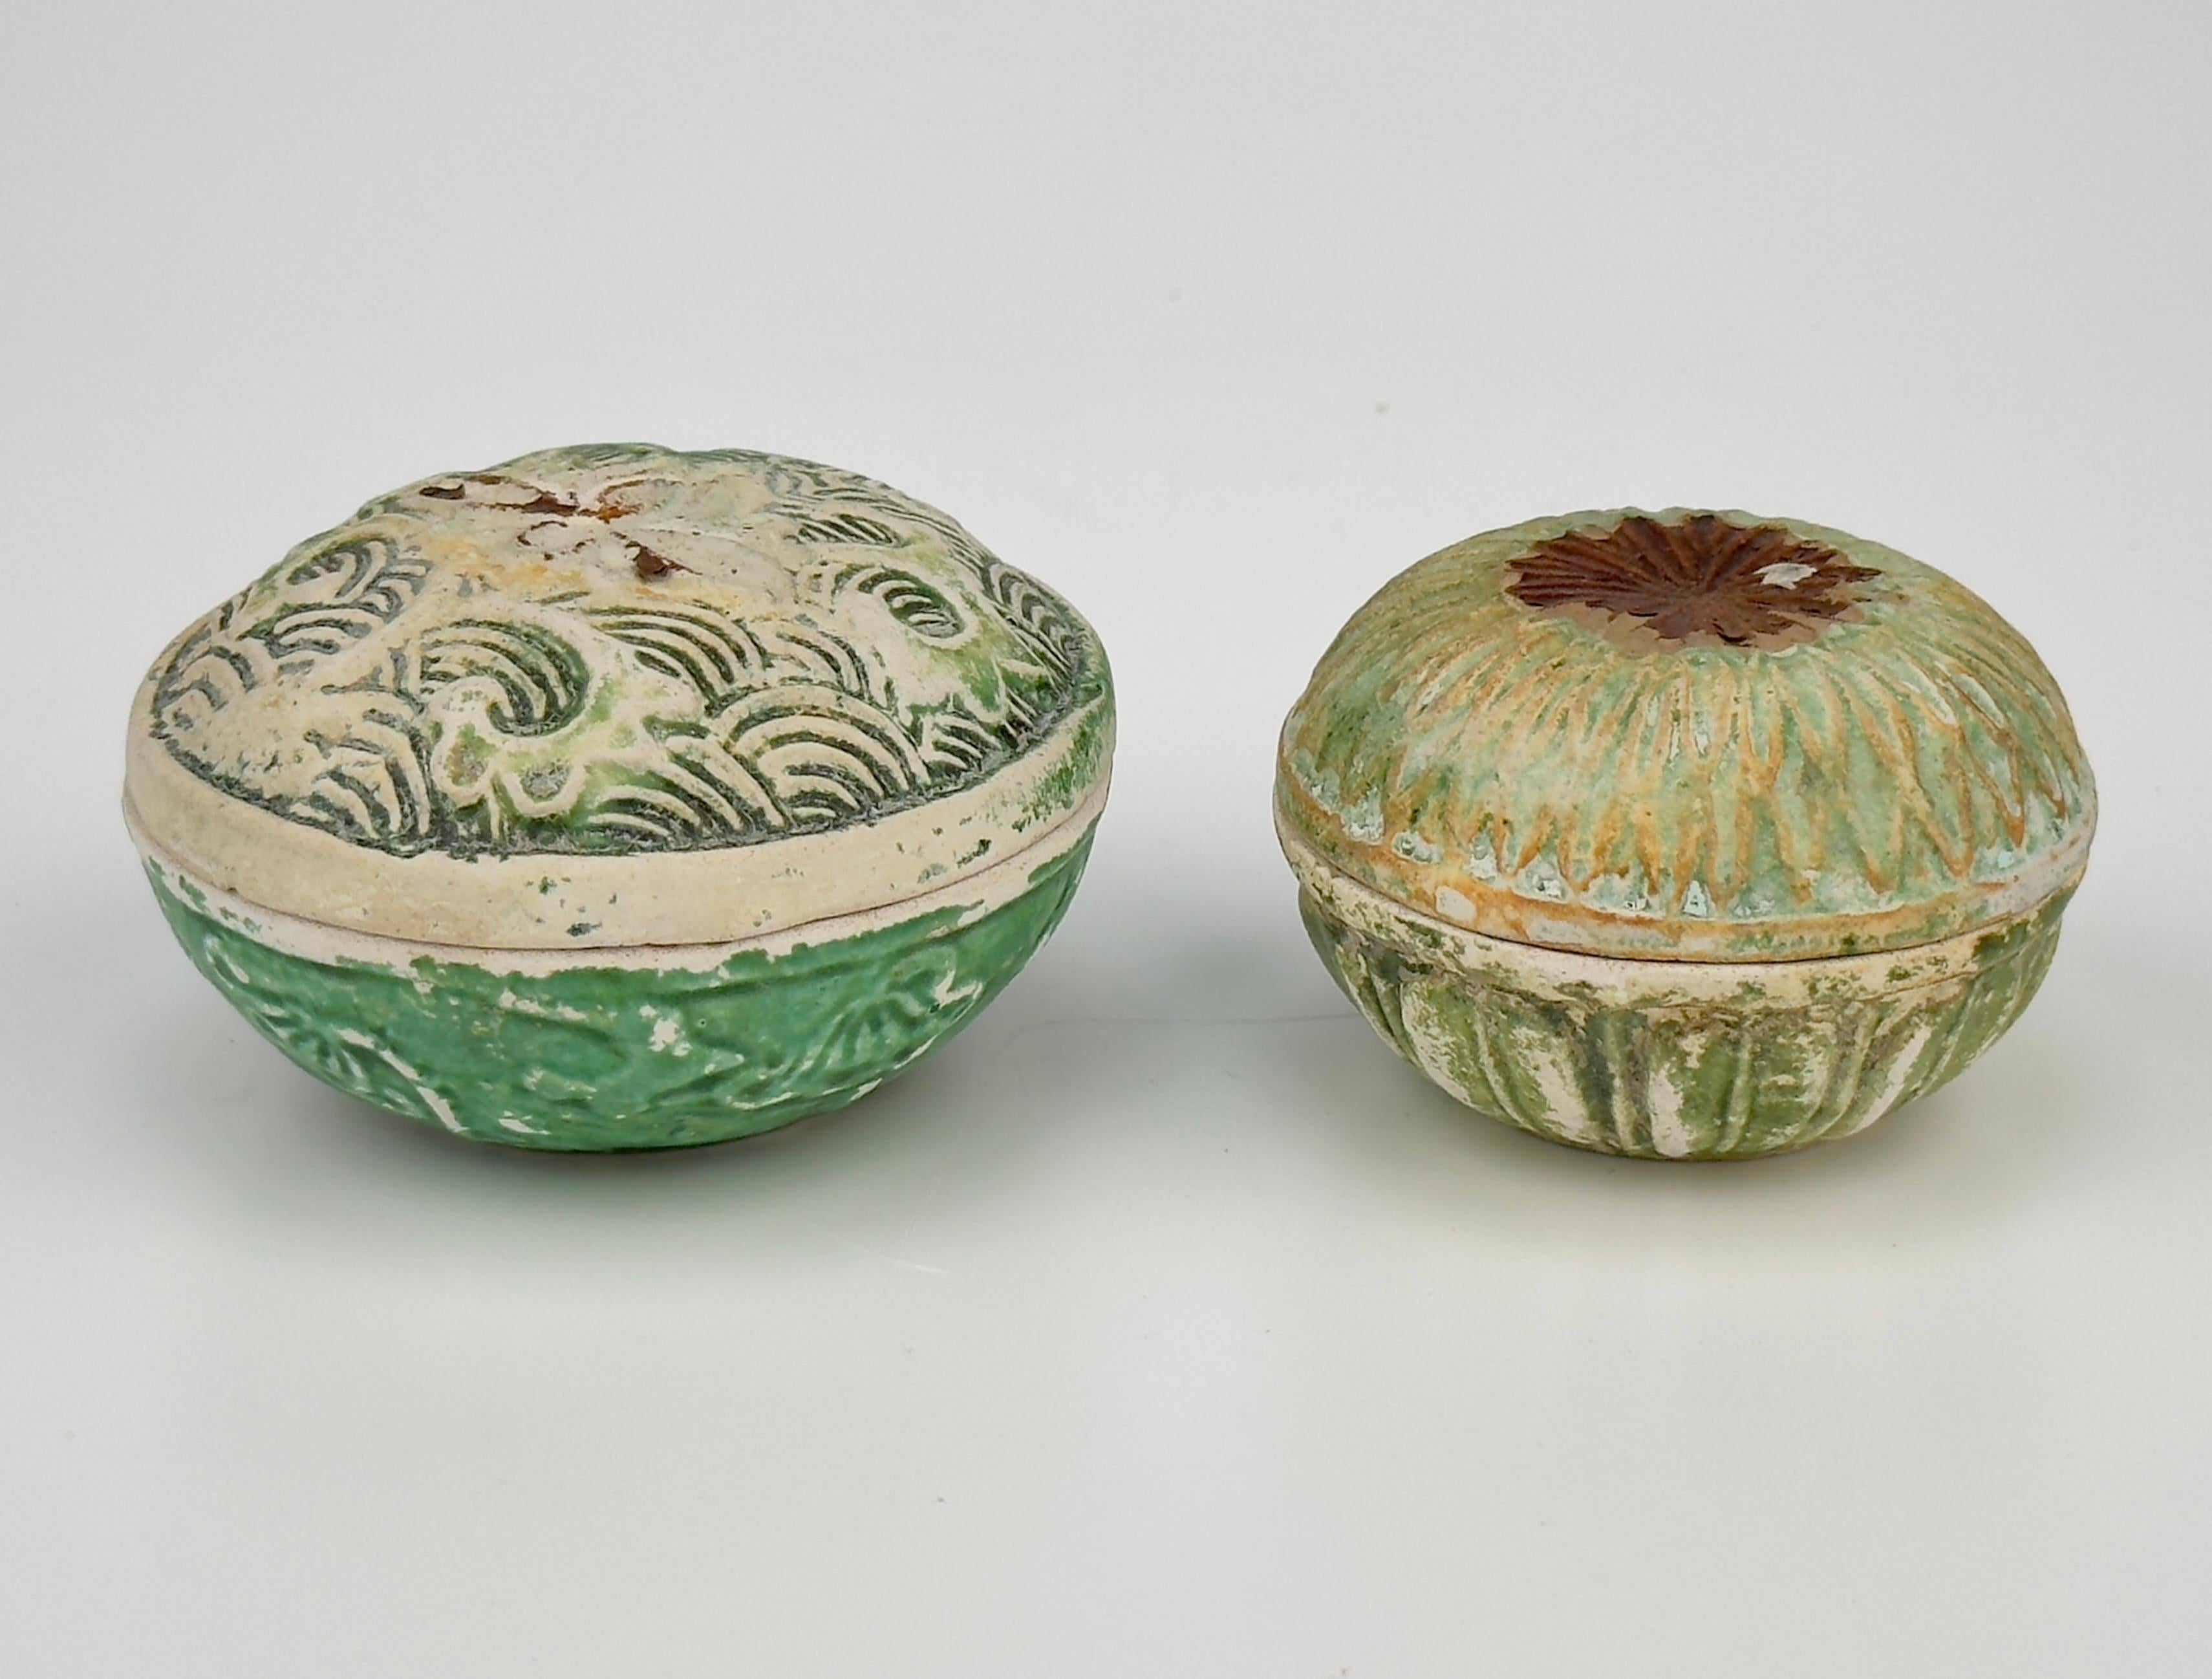 Chinese Swatow Lidded Boxes in the shape of Waves and Flowers, Late Ming Era(16-17th c) For Sale